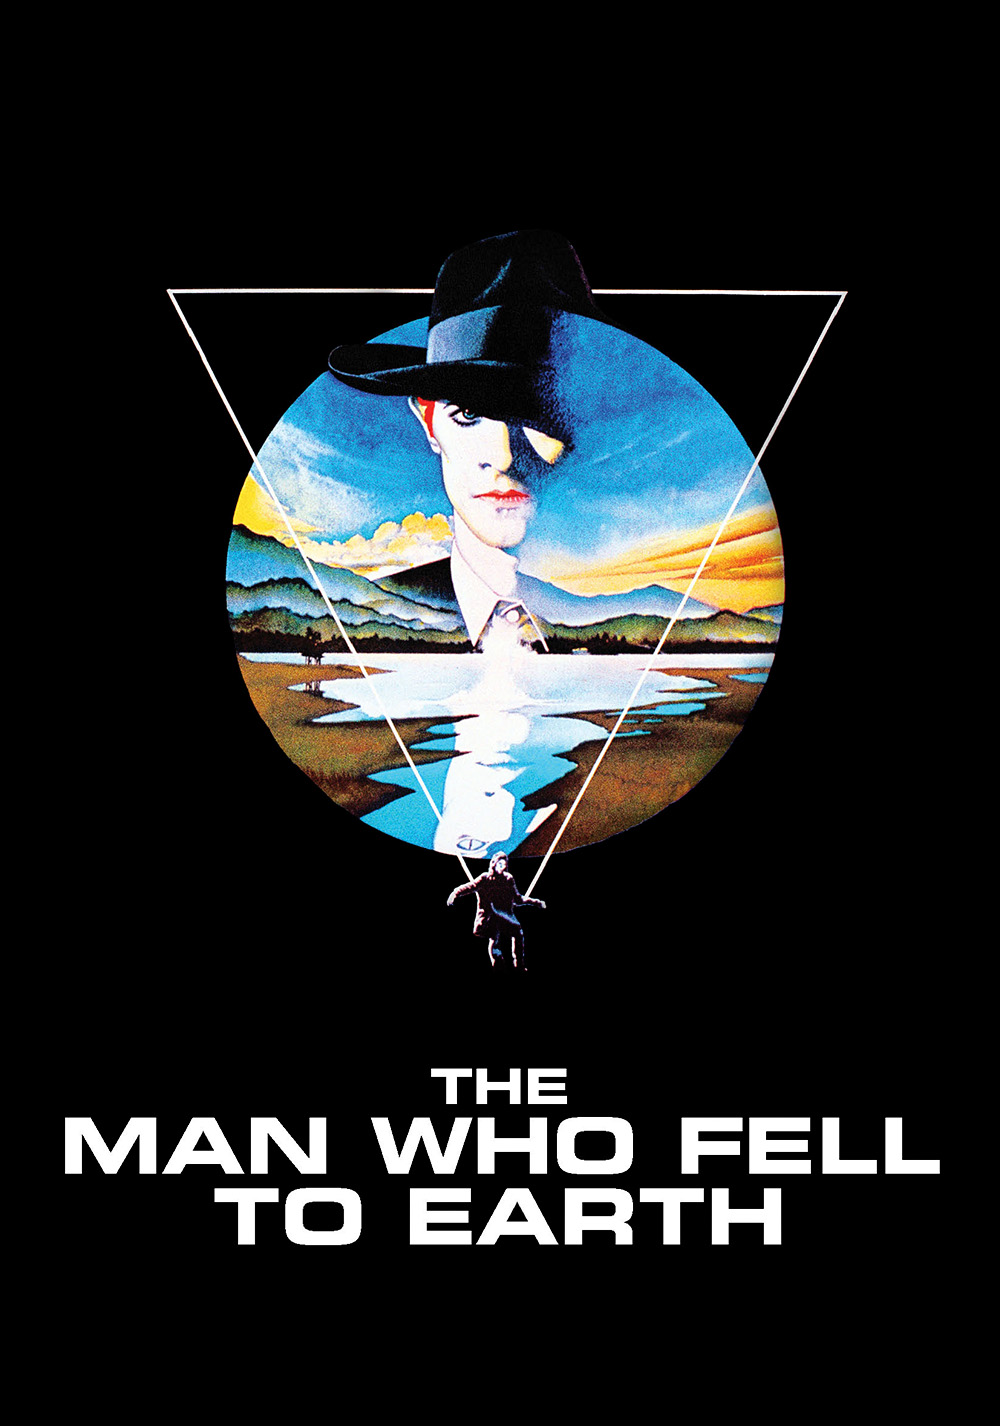 The Man Who Fell to Earth Art